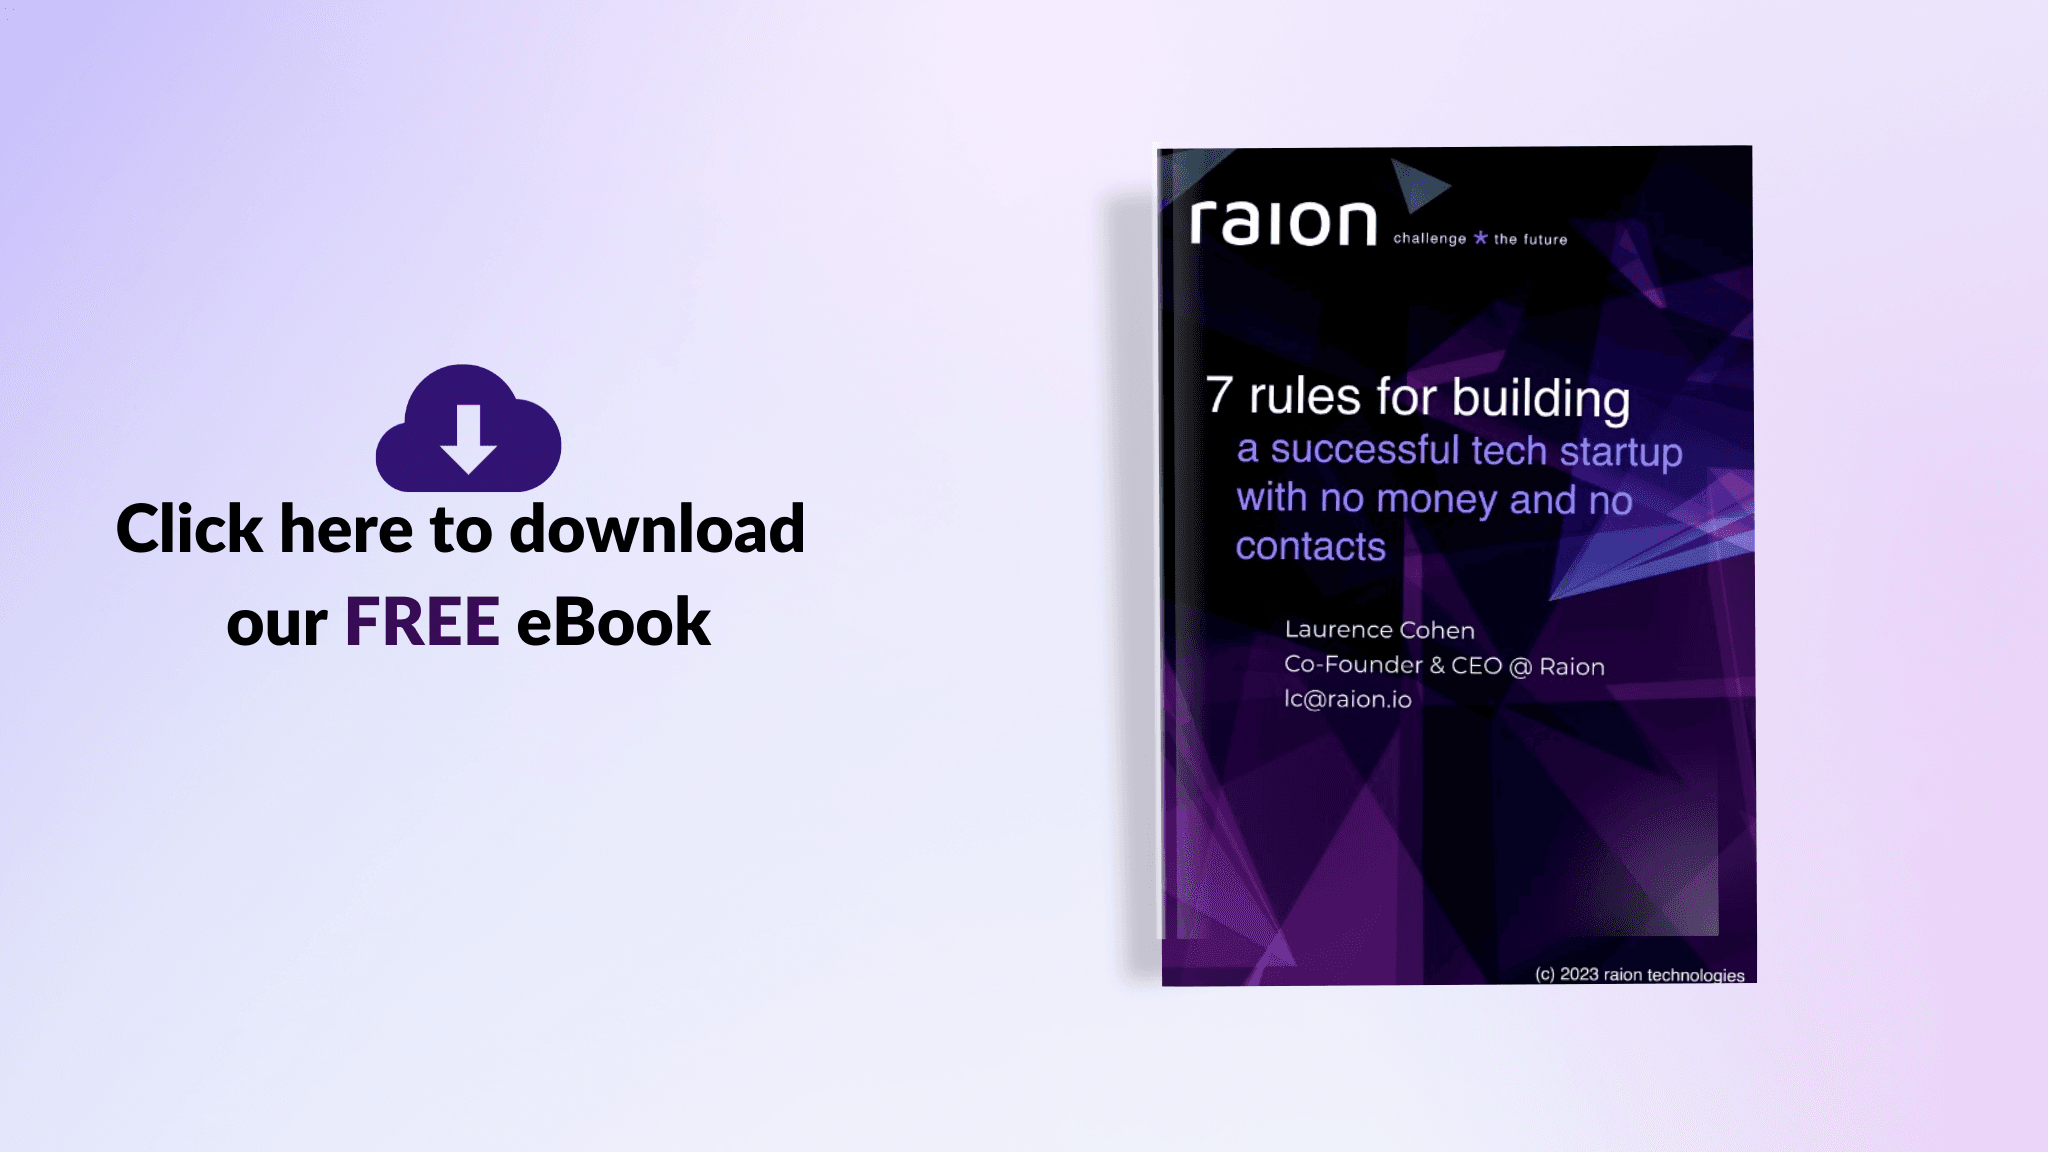 7 rules for building a successful tech startup eBook download image